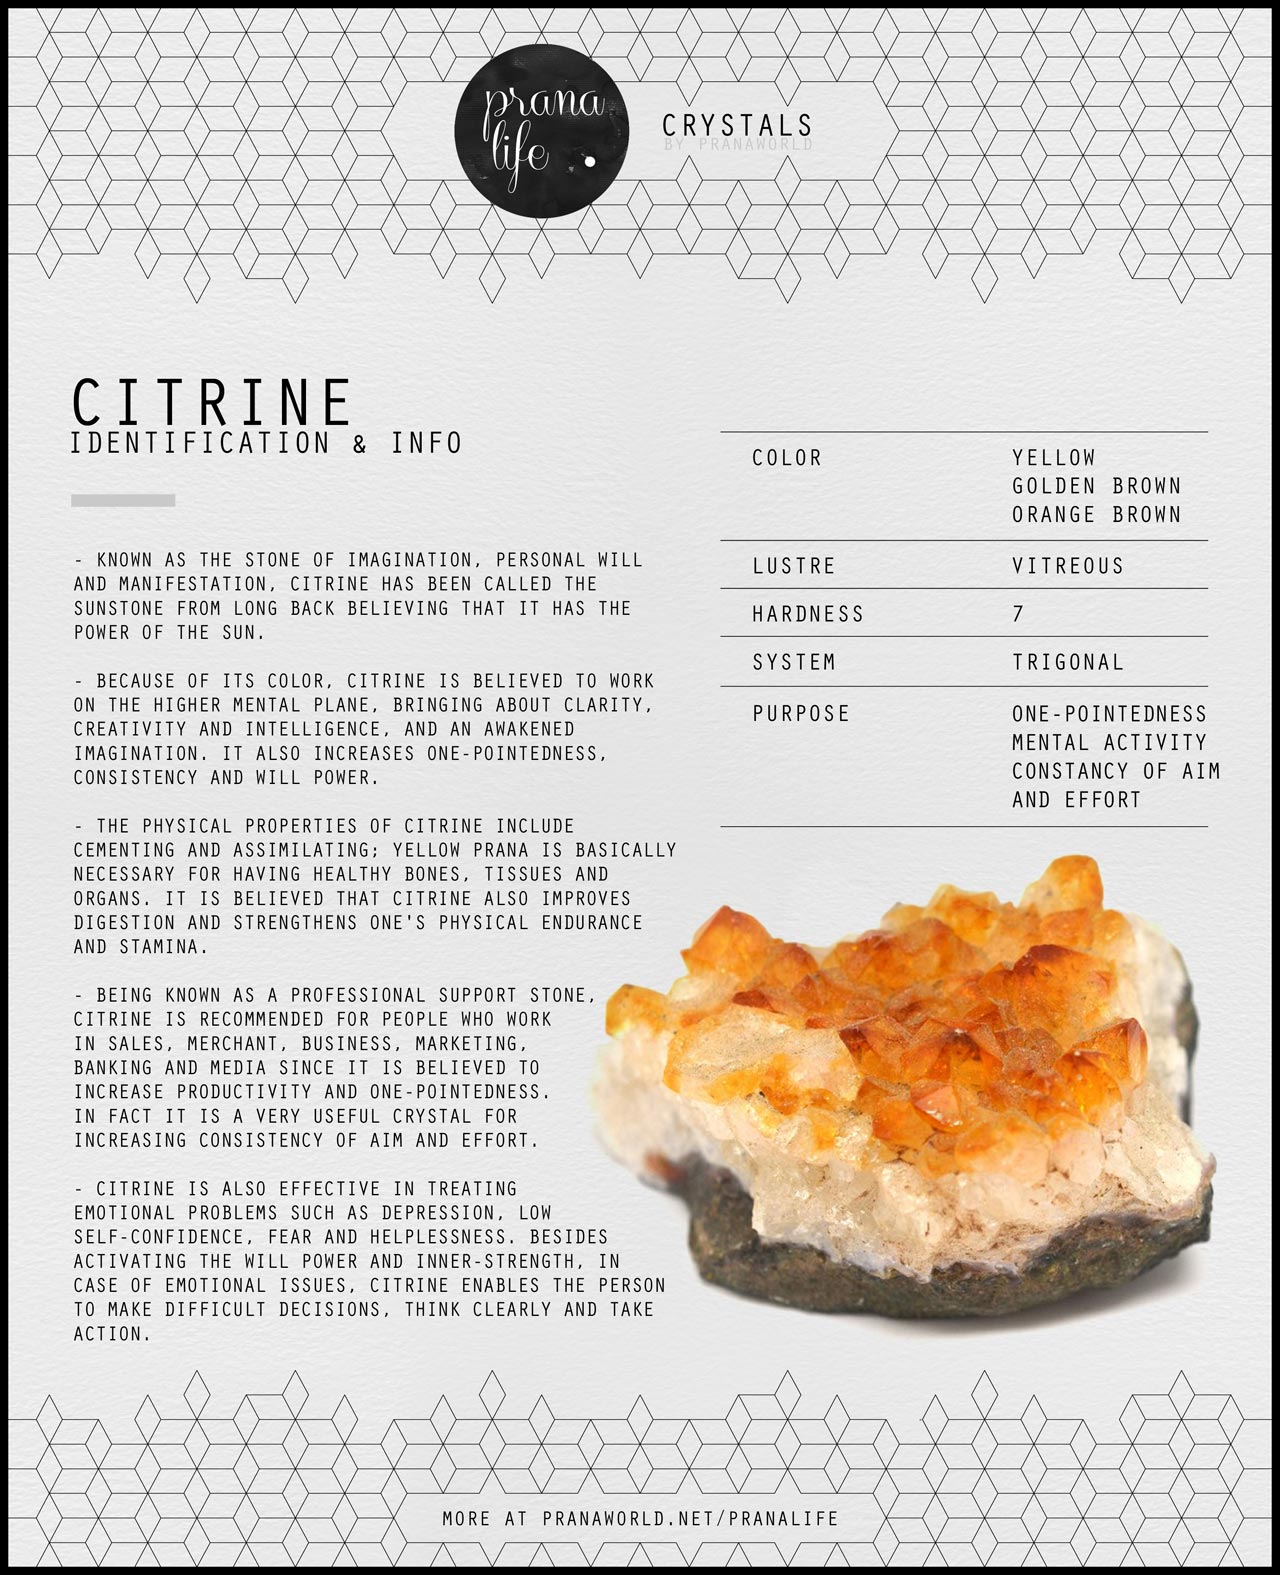 citrine meaning